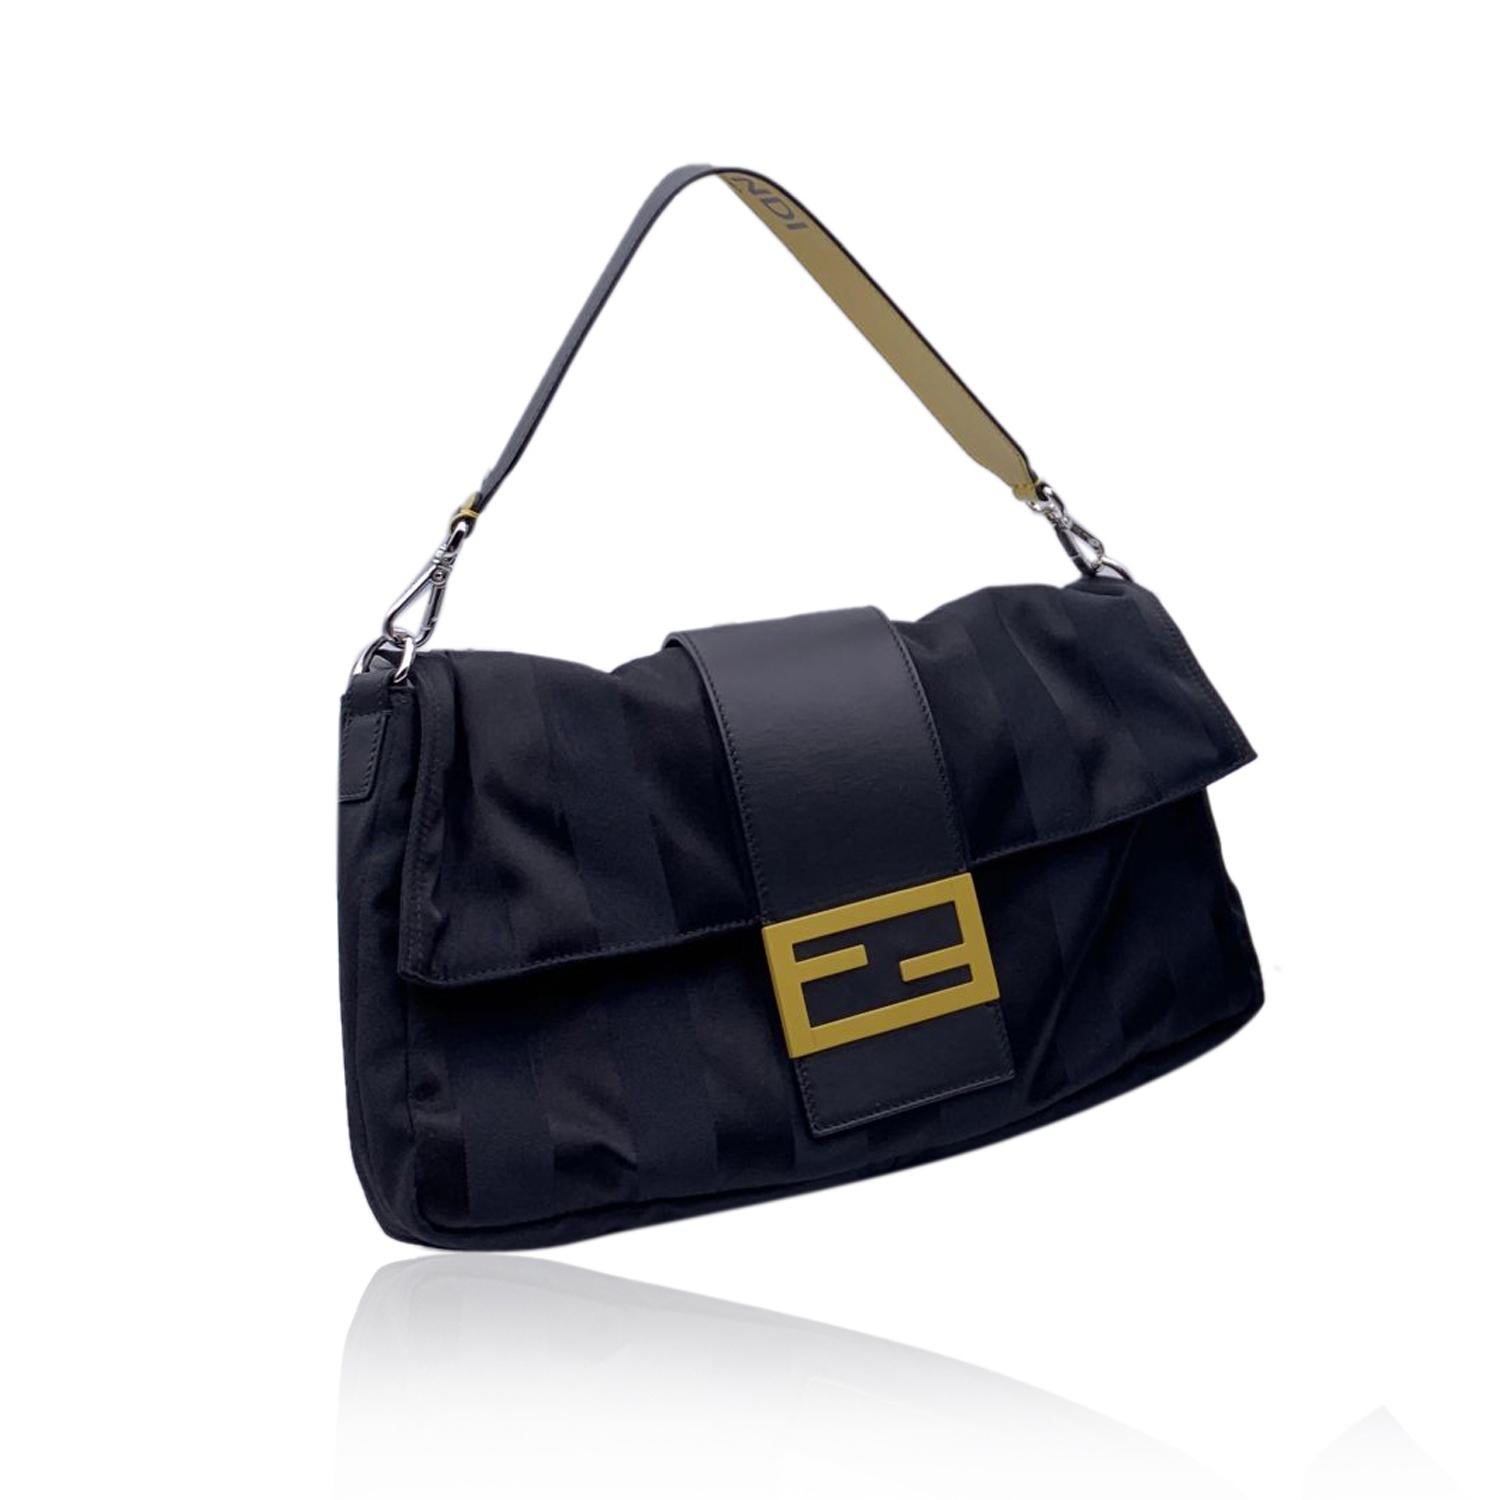 This beautiful Bag will come with a Certificate of Authenticity provided by Entrupy, The certificate will be provided at no further cost.

Fendi 'Baguette Large' bag crafted in black Pequin canvas with genuine leather strap in black and yellow